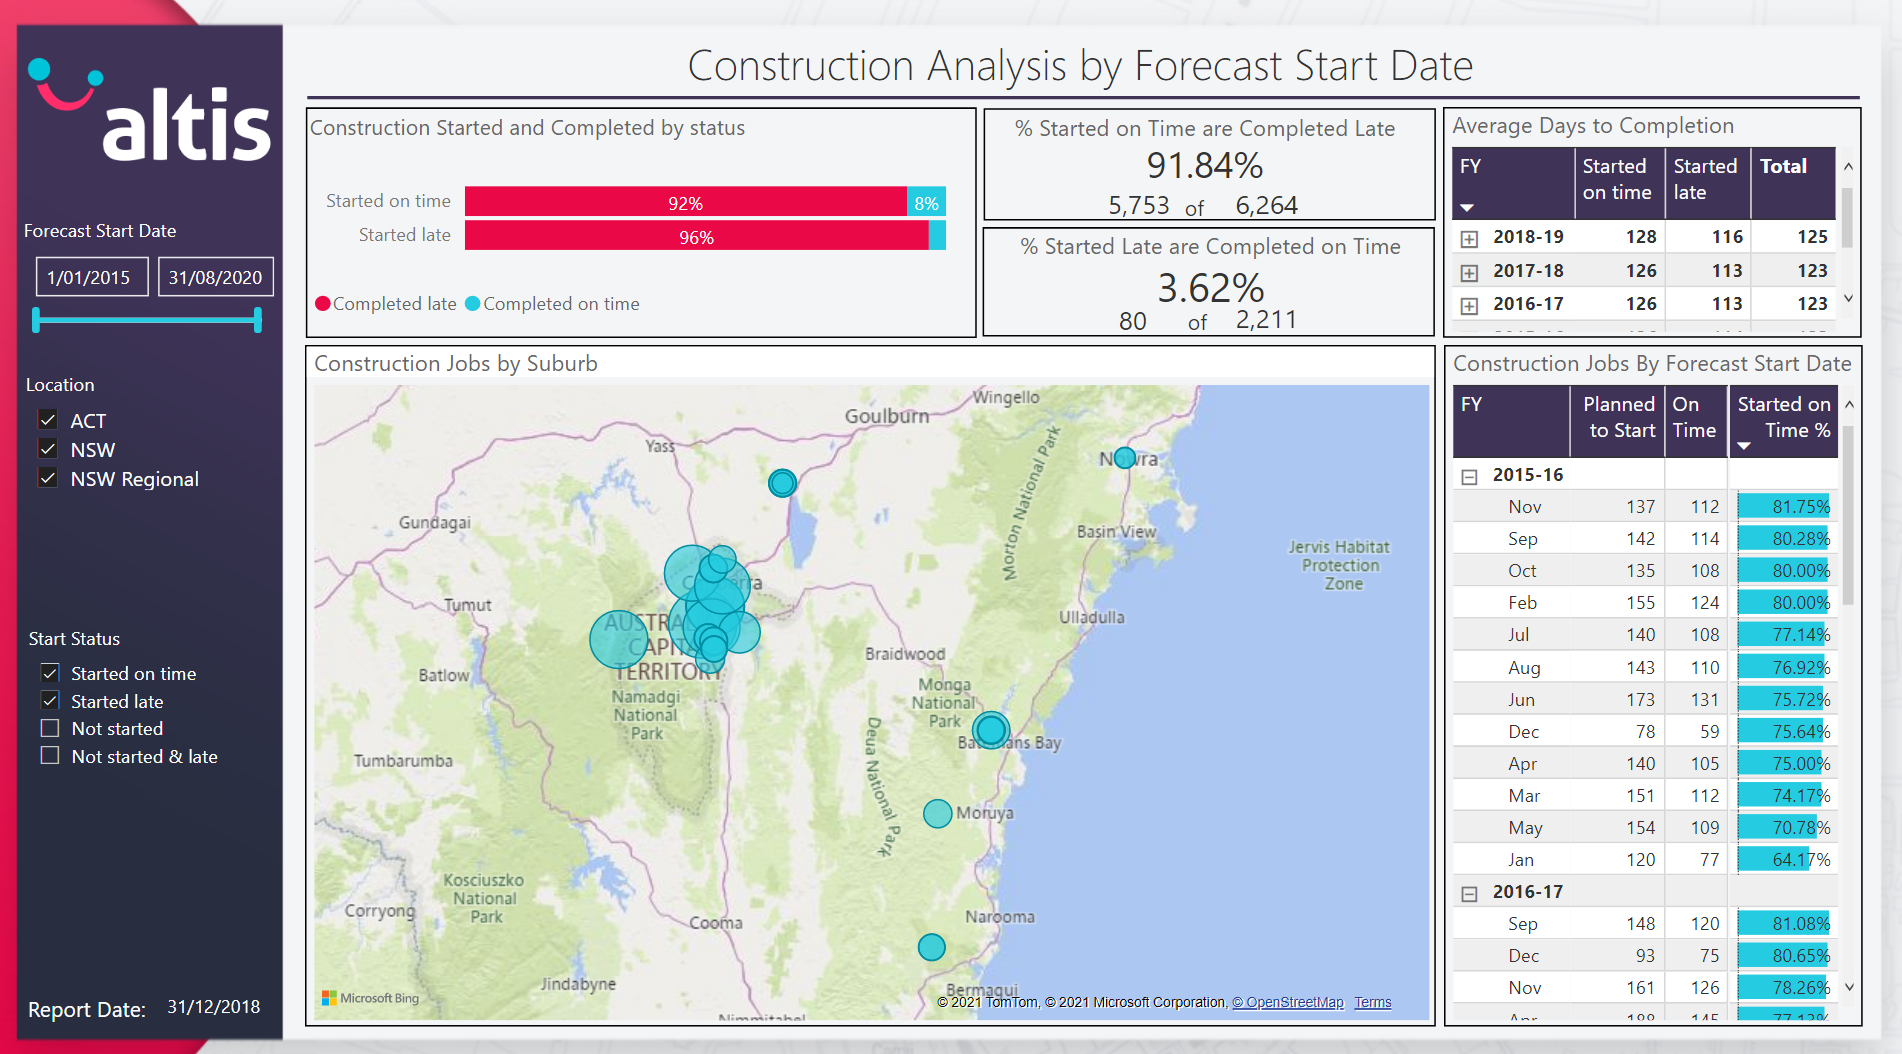 Construction Analysis by Forecast Start Date